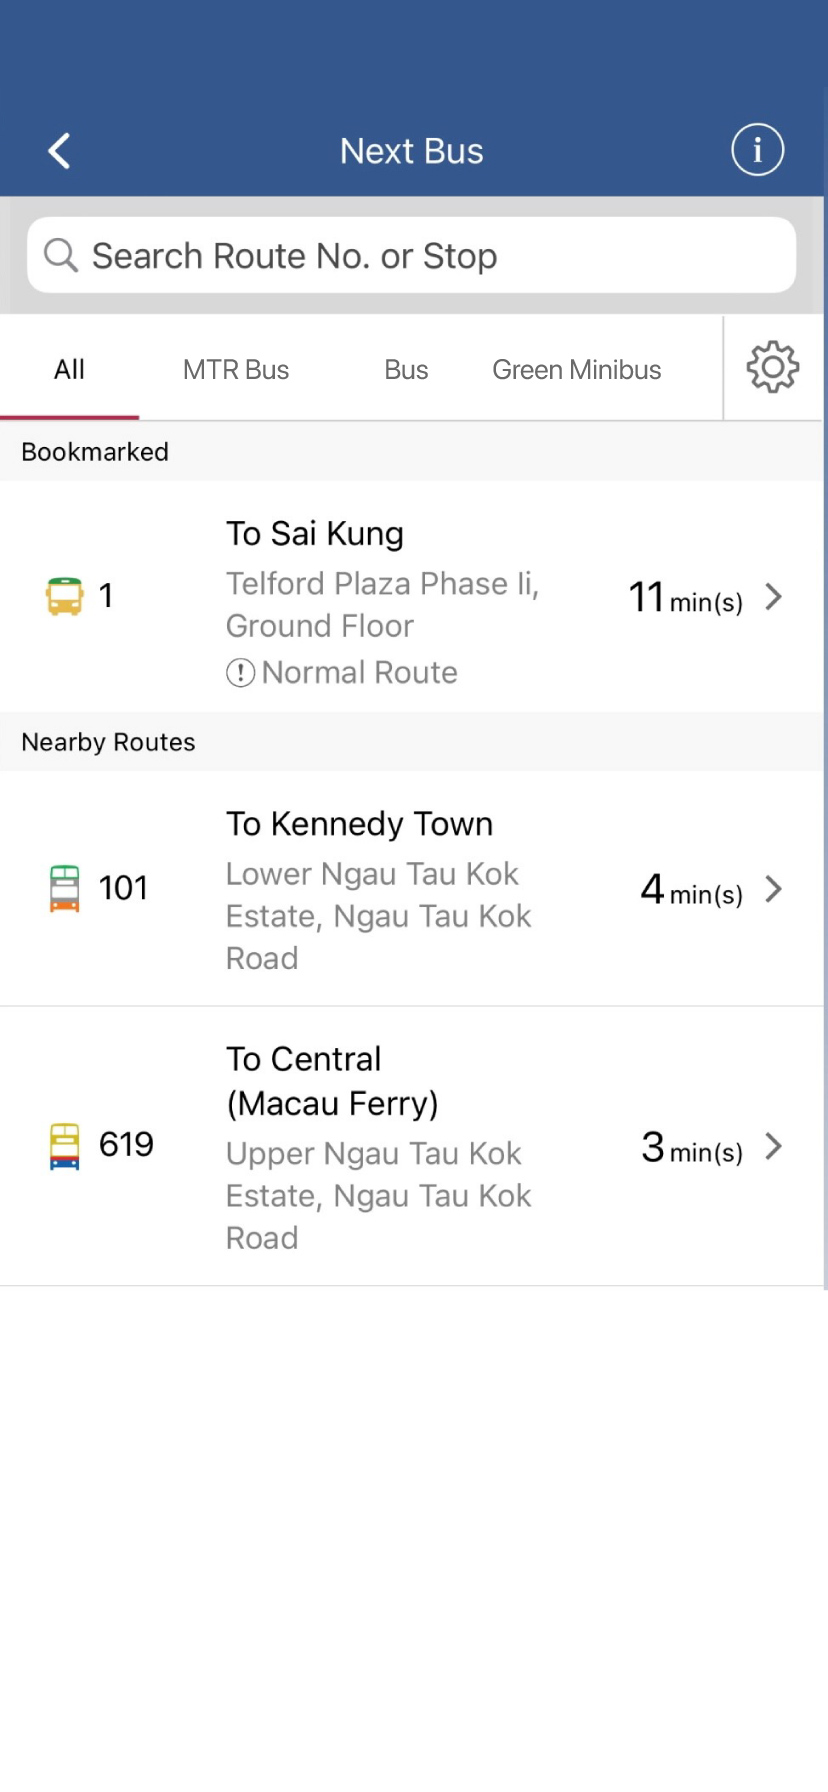 Turn on the location services on your device - the function will display the routes of franchised buses and green minibuses within 400 metres. You may also input the route number or stop name directly for a more precise search.